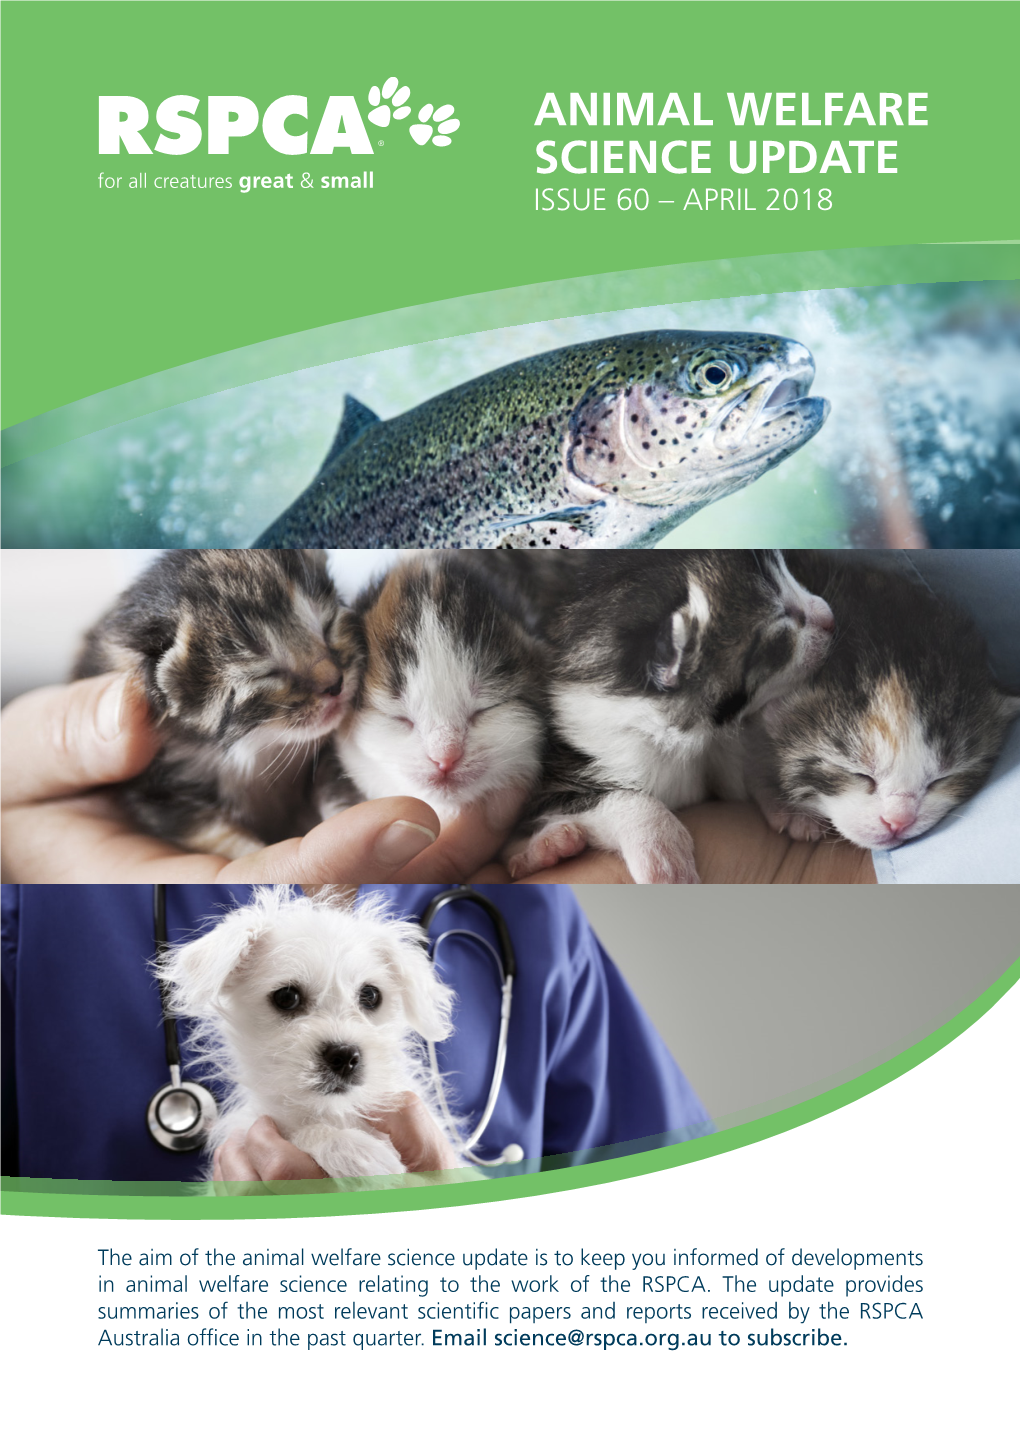 Animal Welfare Science Update Issue 60 – April 2018